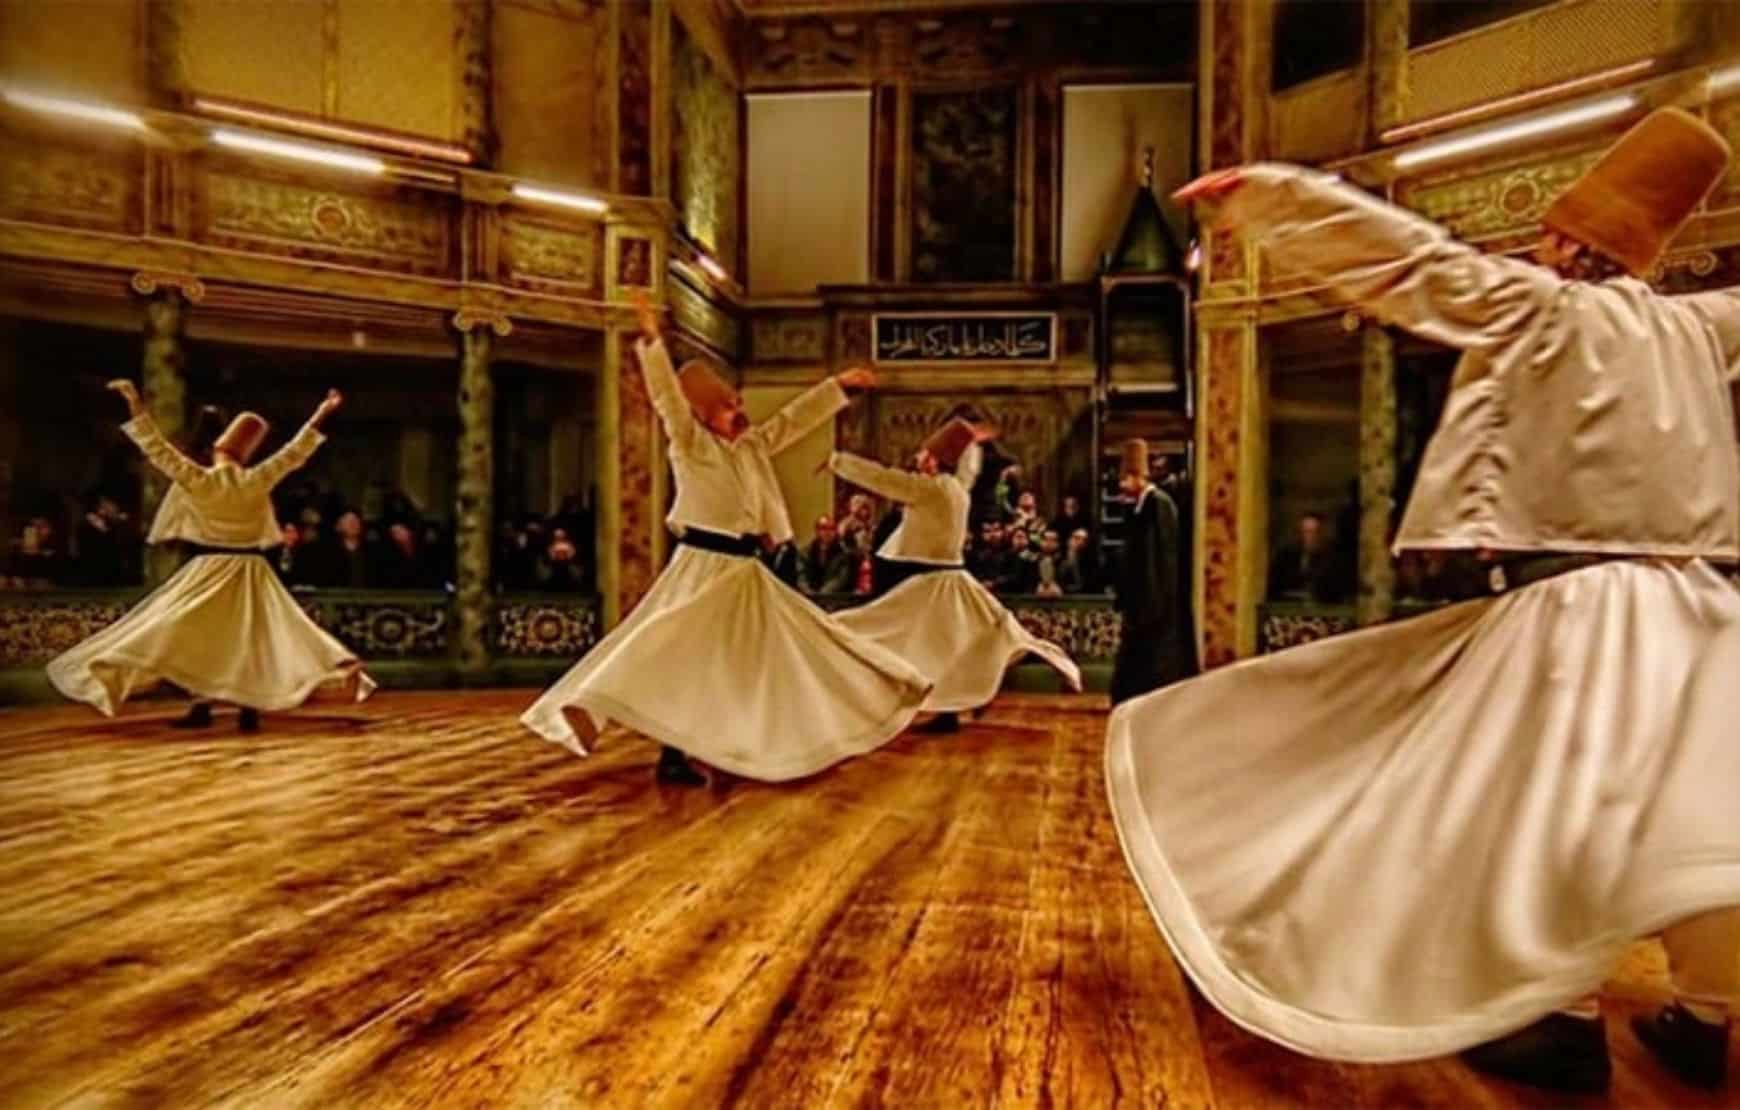 Dervish ceremony in cappadocia - whirling dervishes in a hall